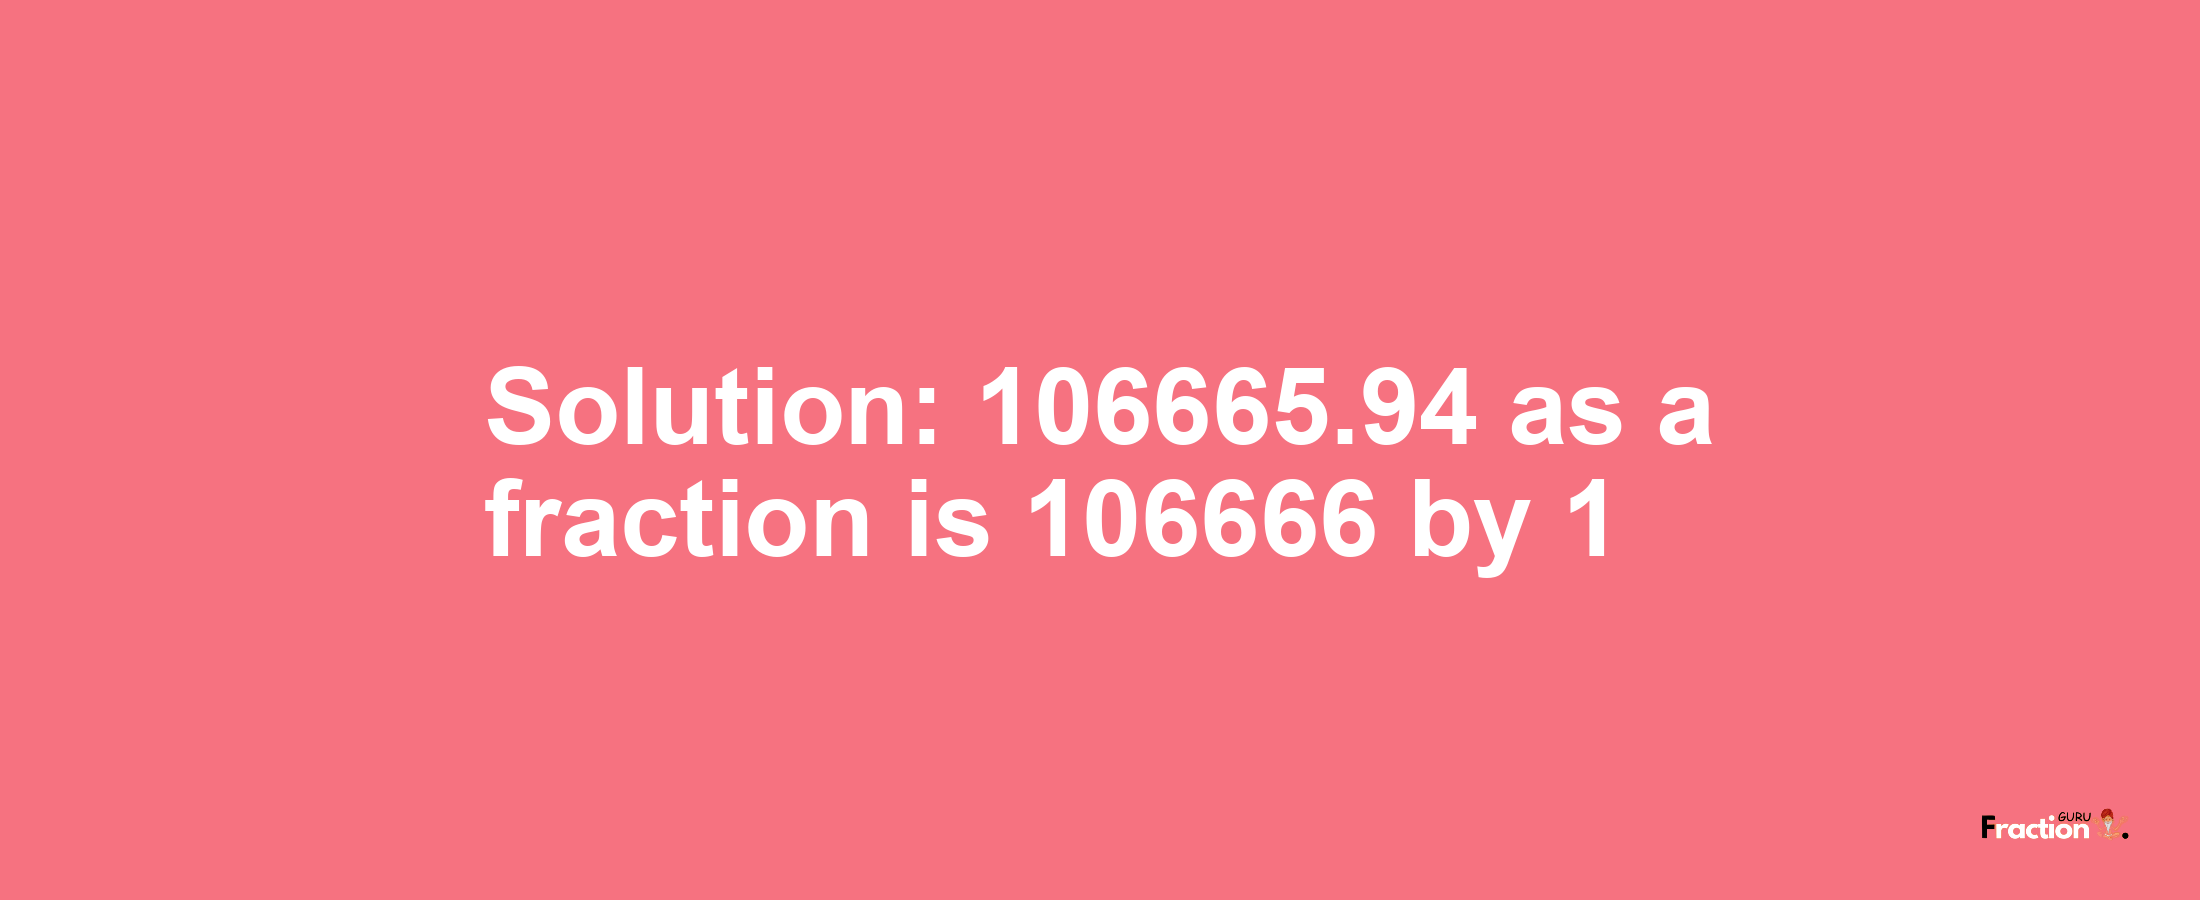 Solution:106665.94 as a fraction is 106666/1